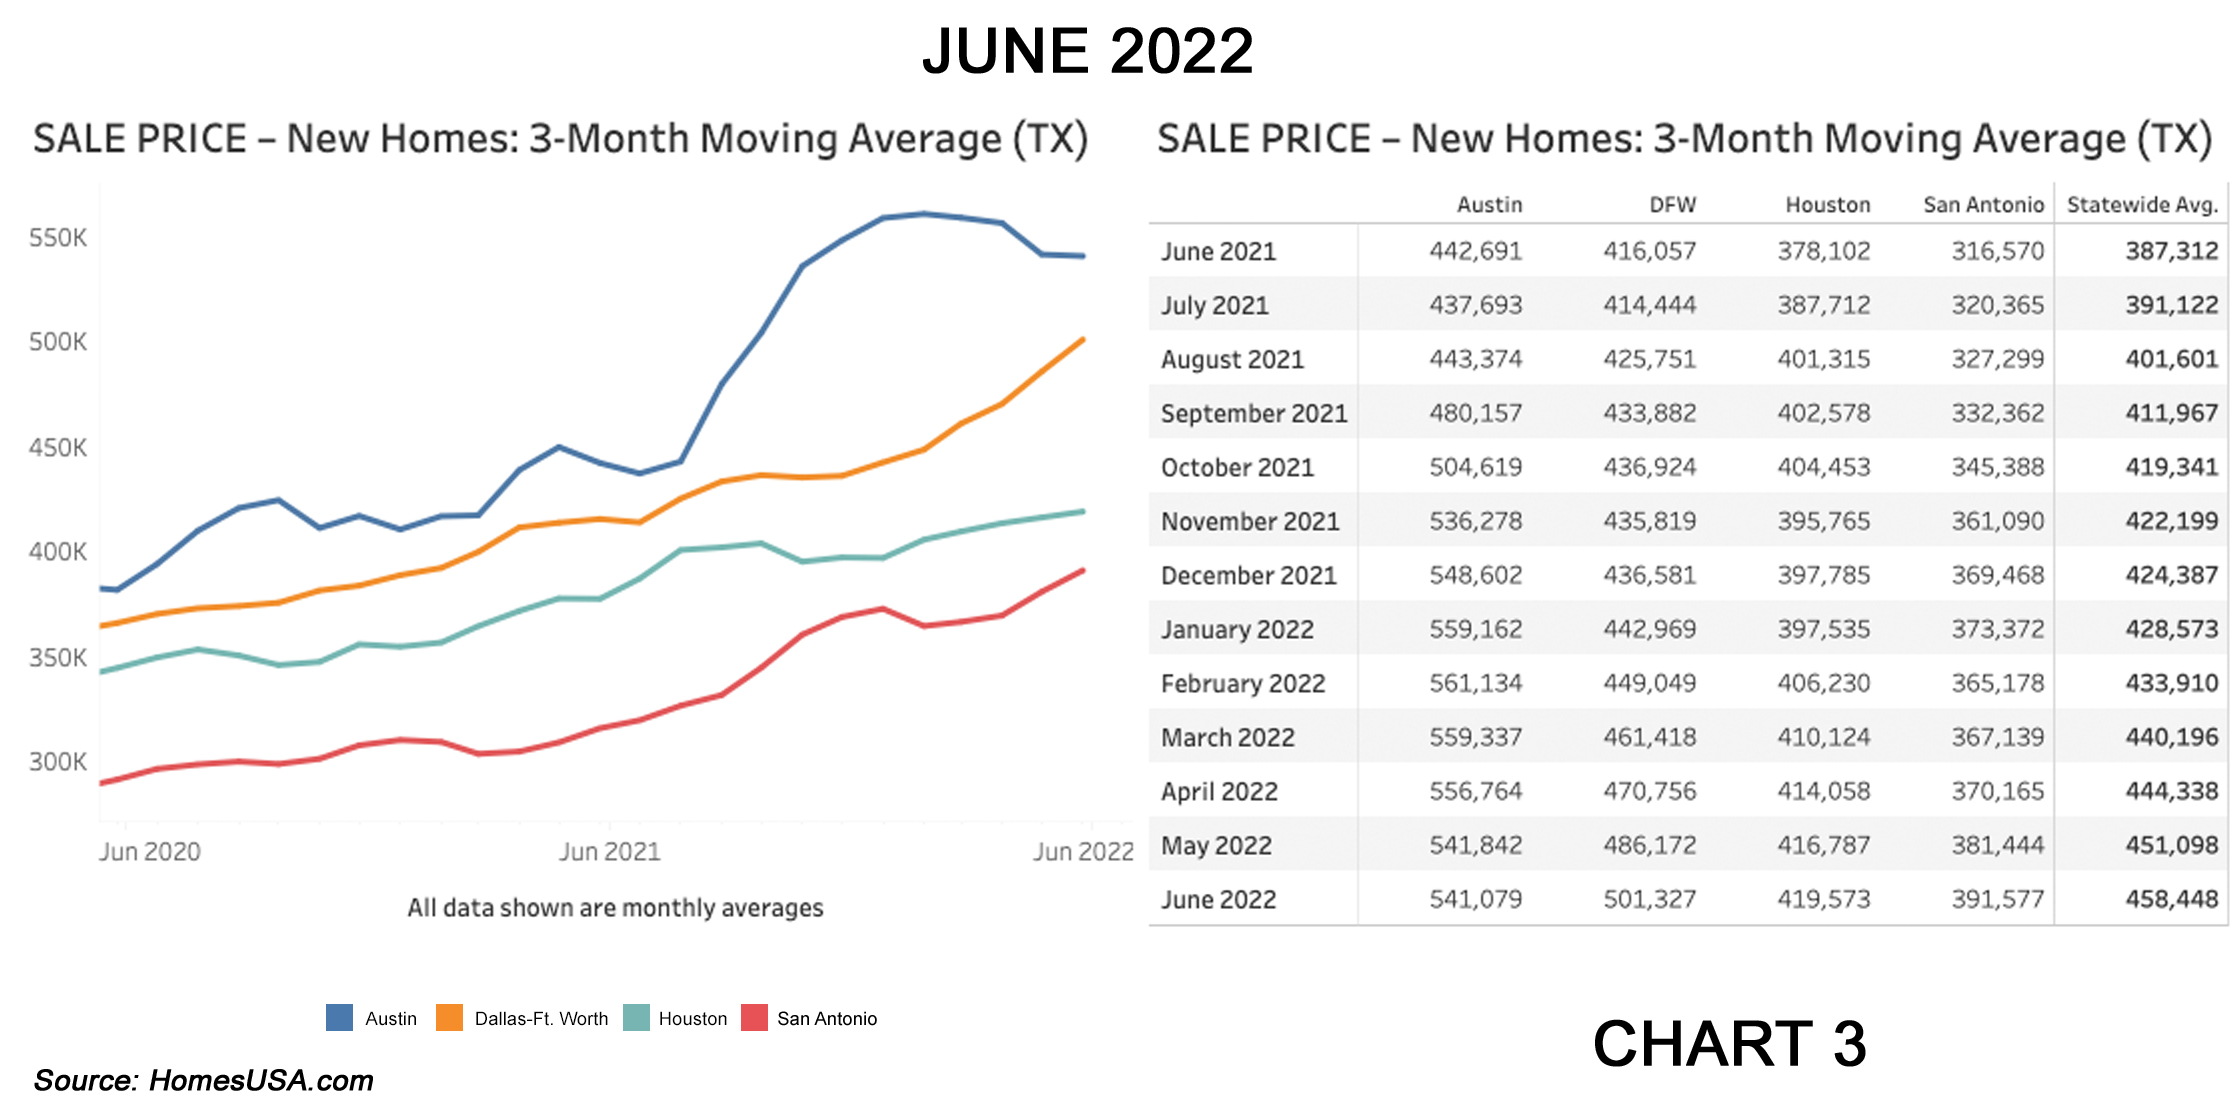 Chart 3: Texas New Home Sales Prices –June 2022